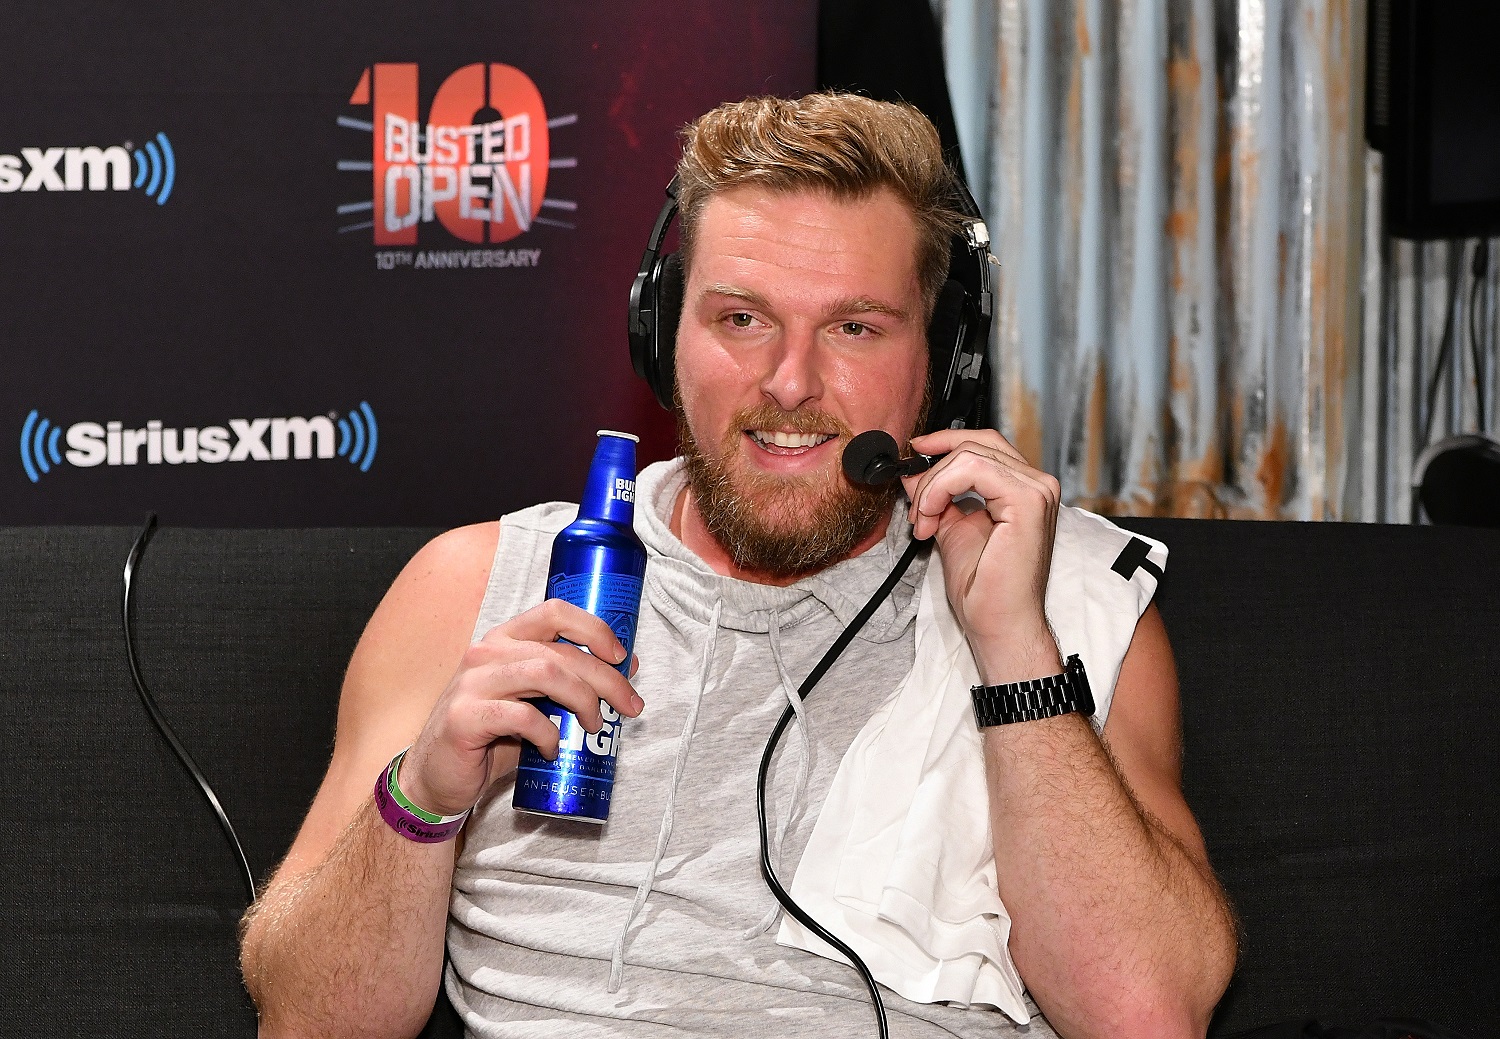 Pat McAfee attends SiriusXM's 'Busted Open,' celebrating 10th anniversary In New York City on April 6, 2019.